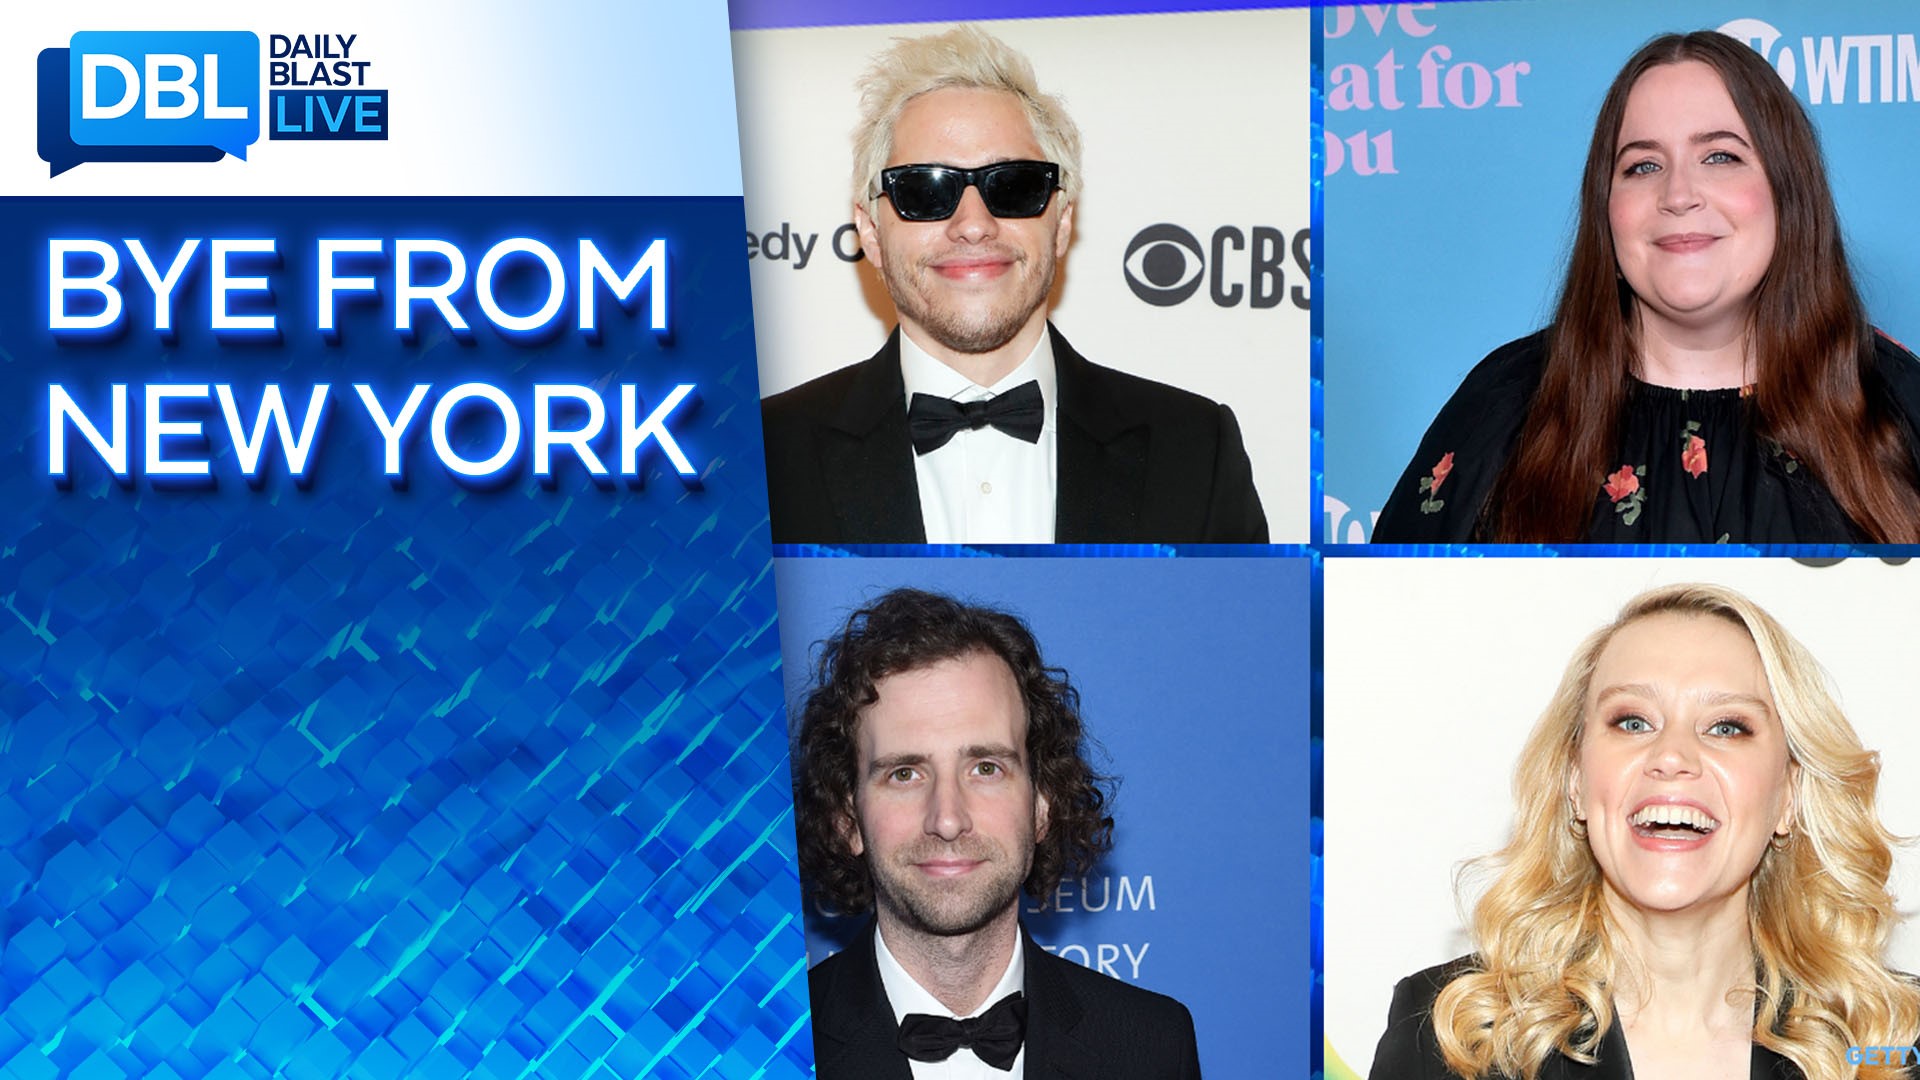 Pete Davidson, Kate McKinnon, Aidy Bryant and Kyle Mooney all exited after the season 47 finale.